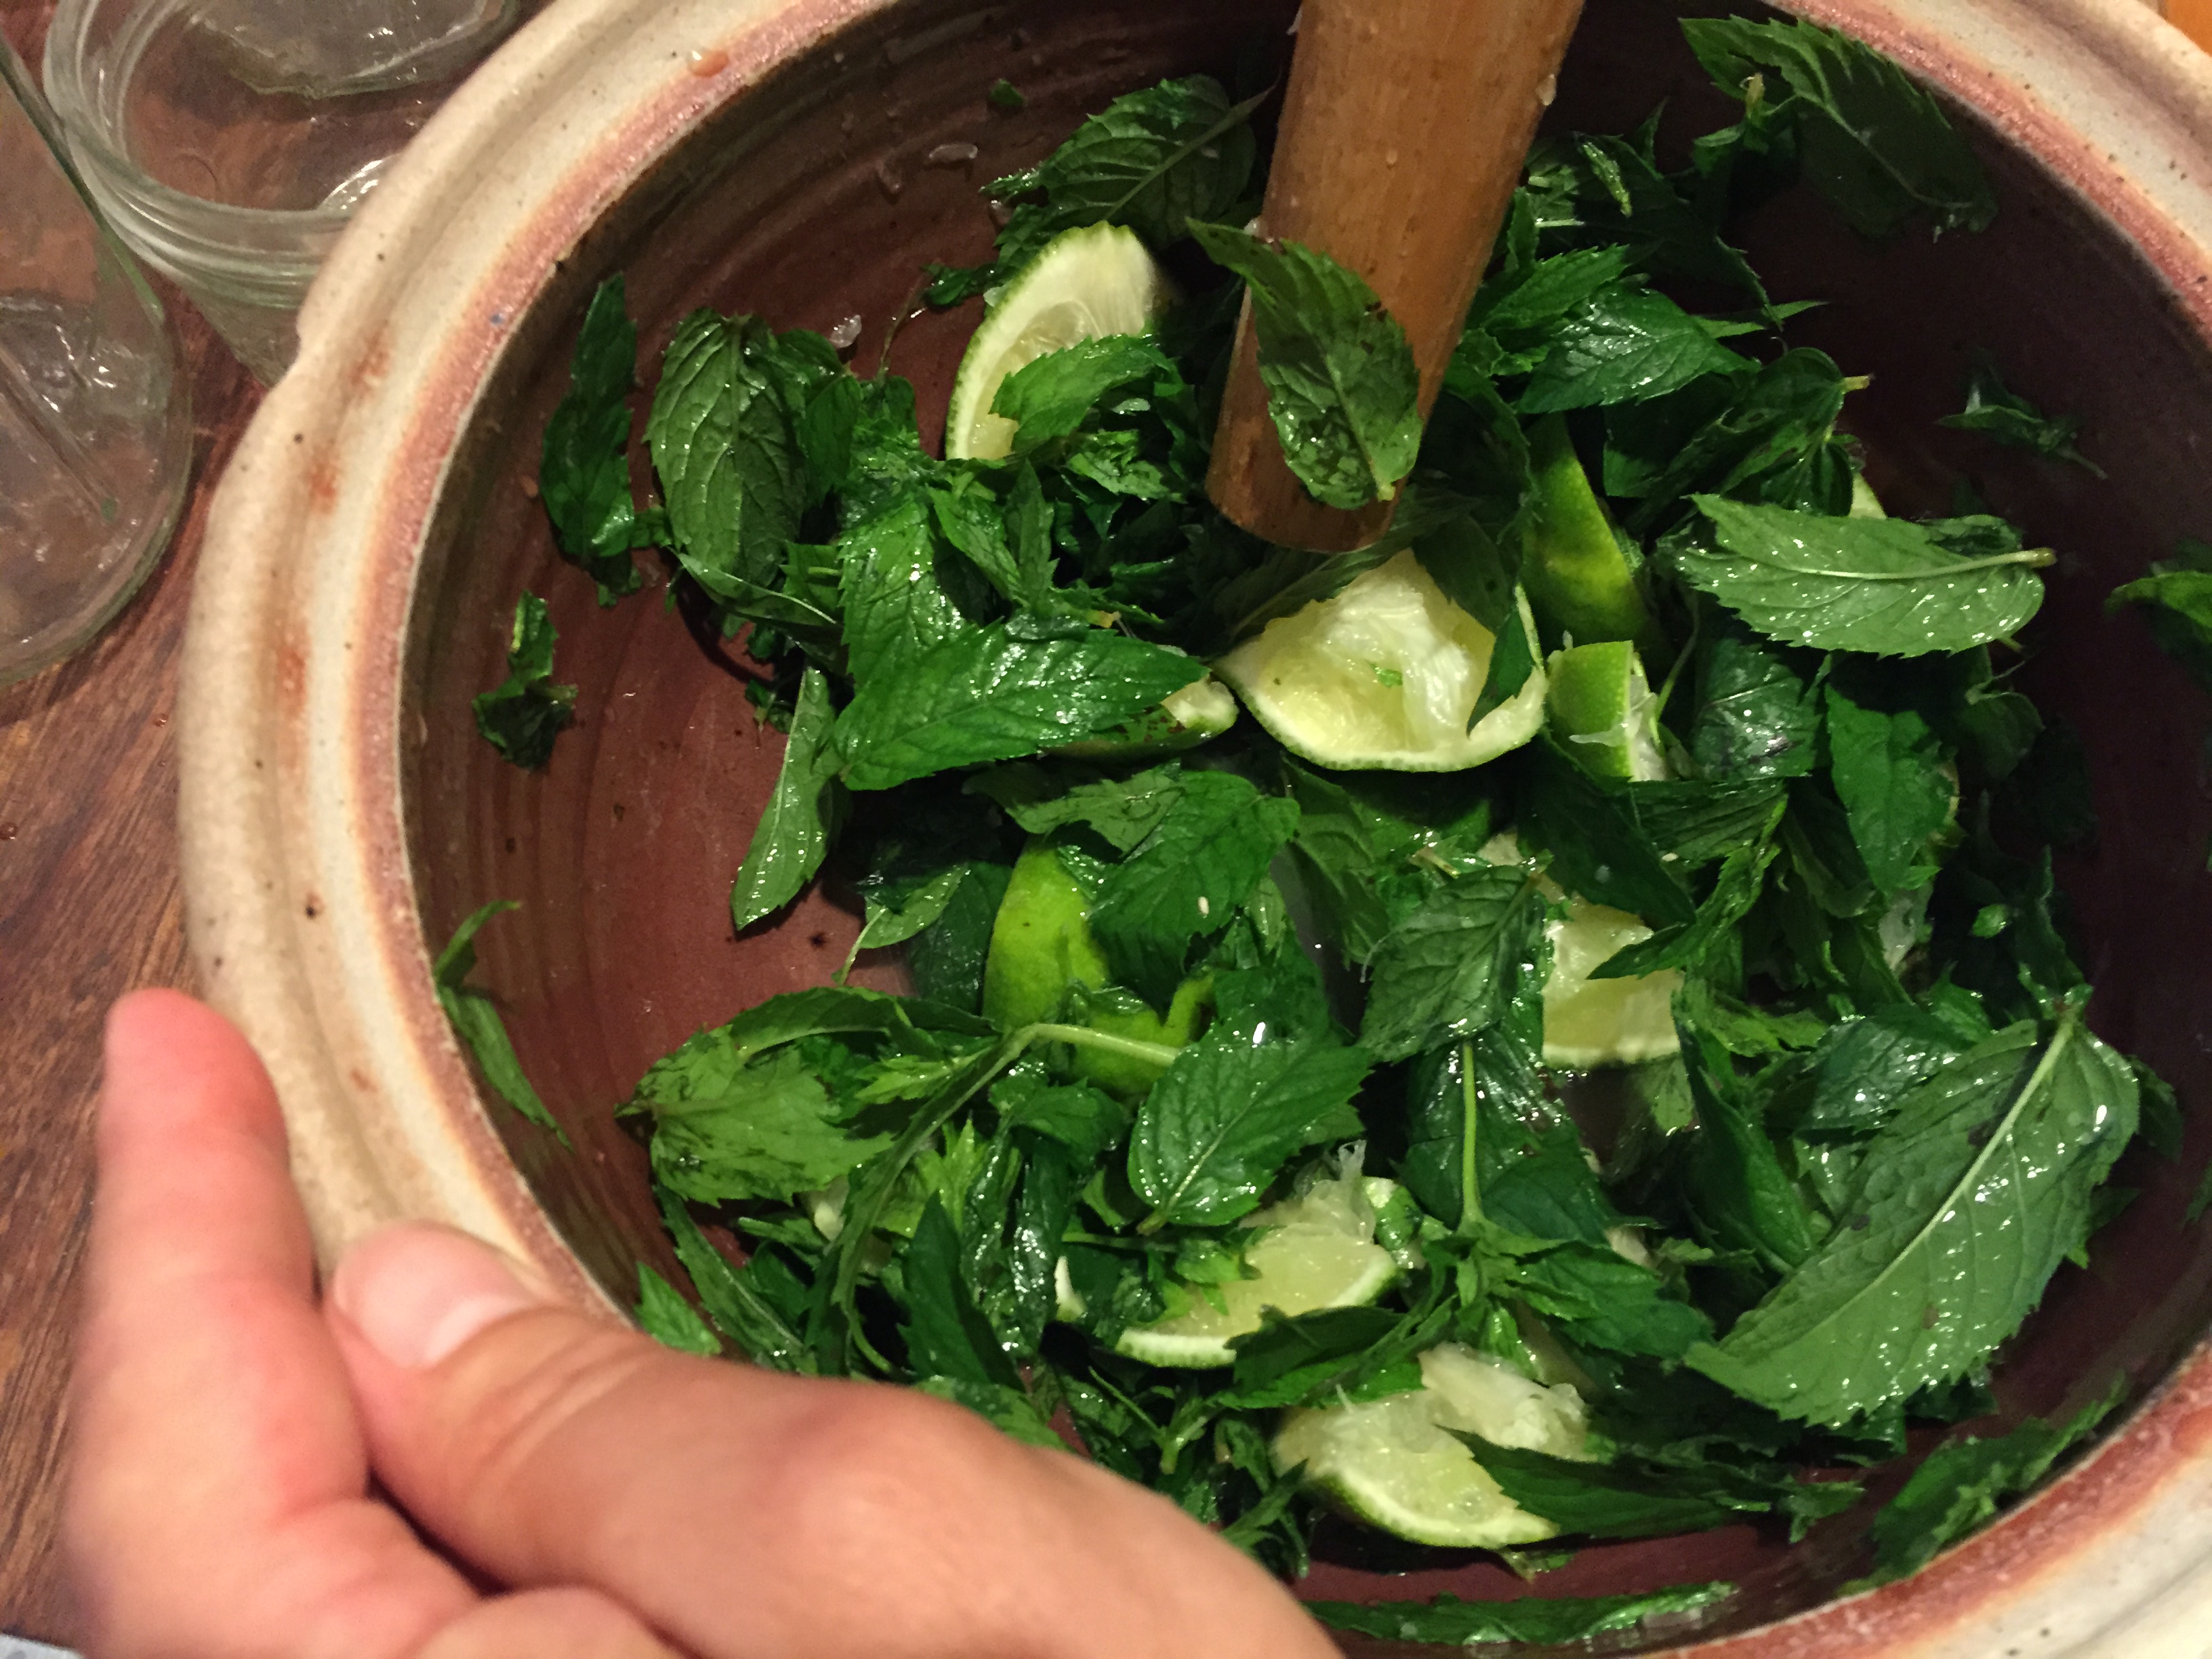 Rebecca preparing the mint and lime for a favorite fall afternoon preparation: mojitos!